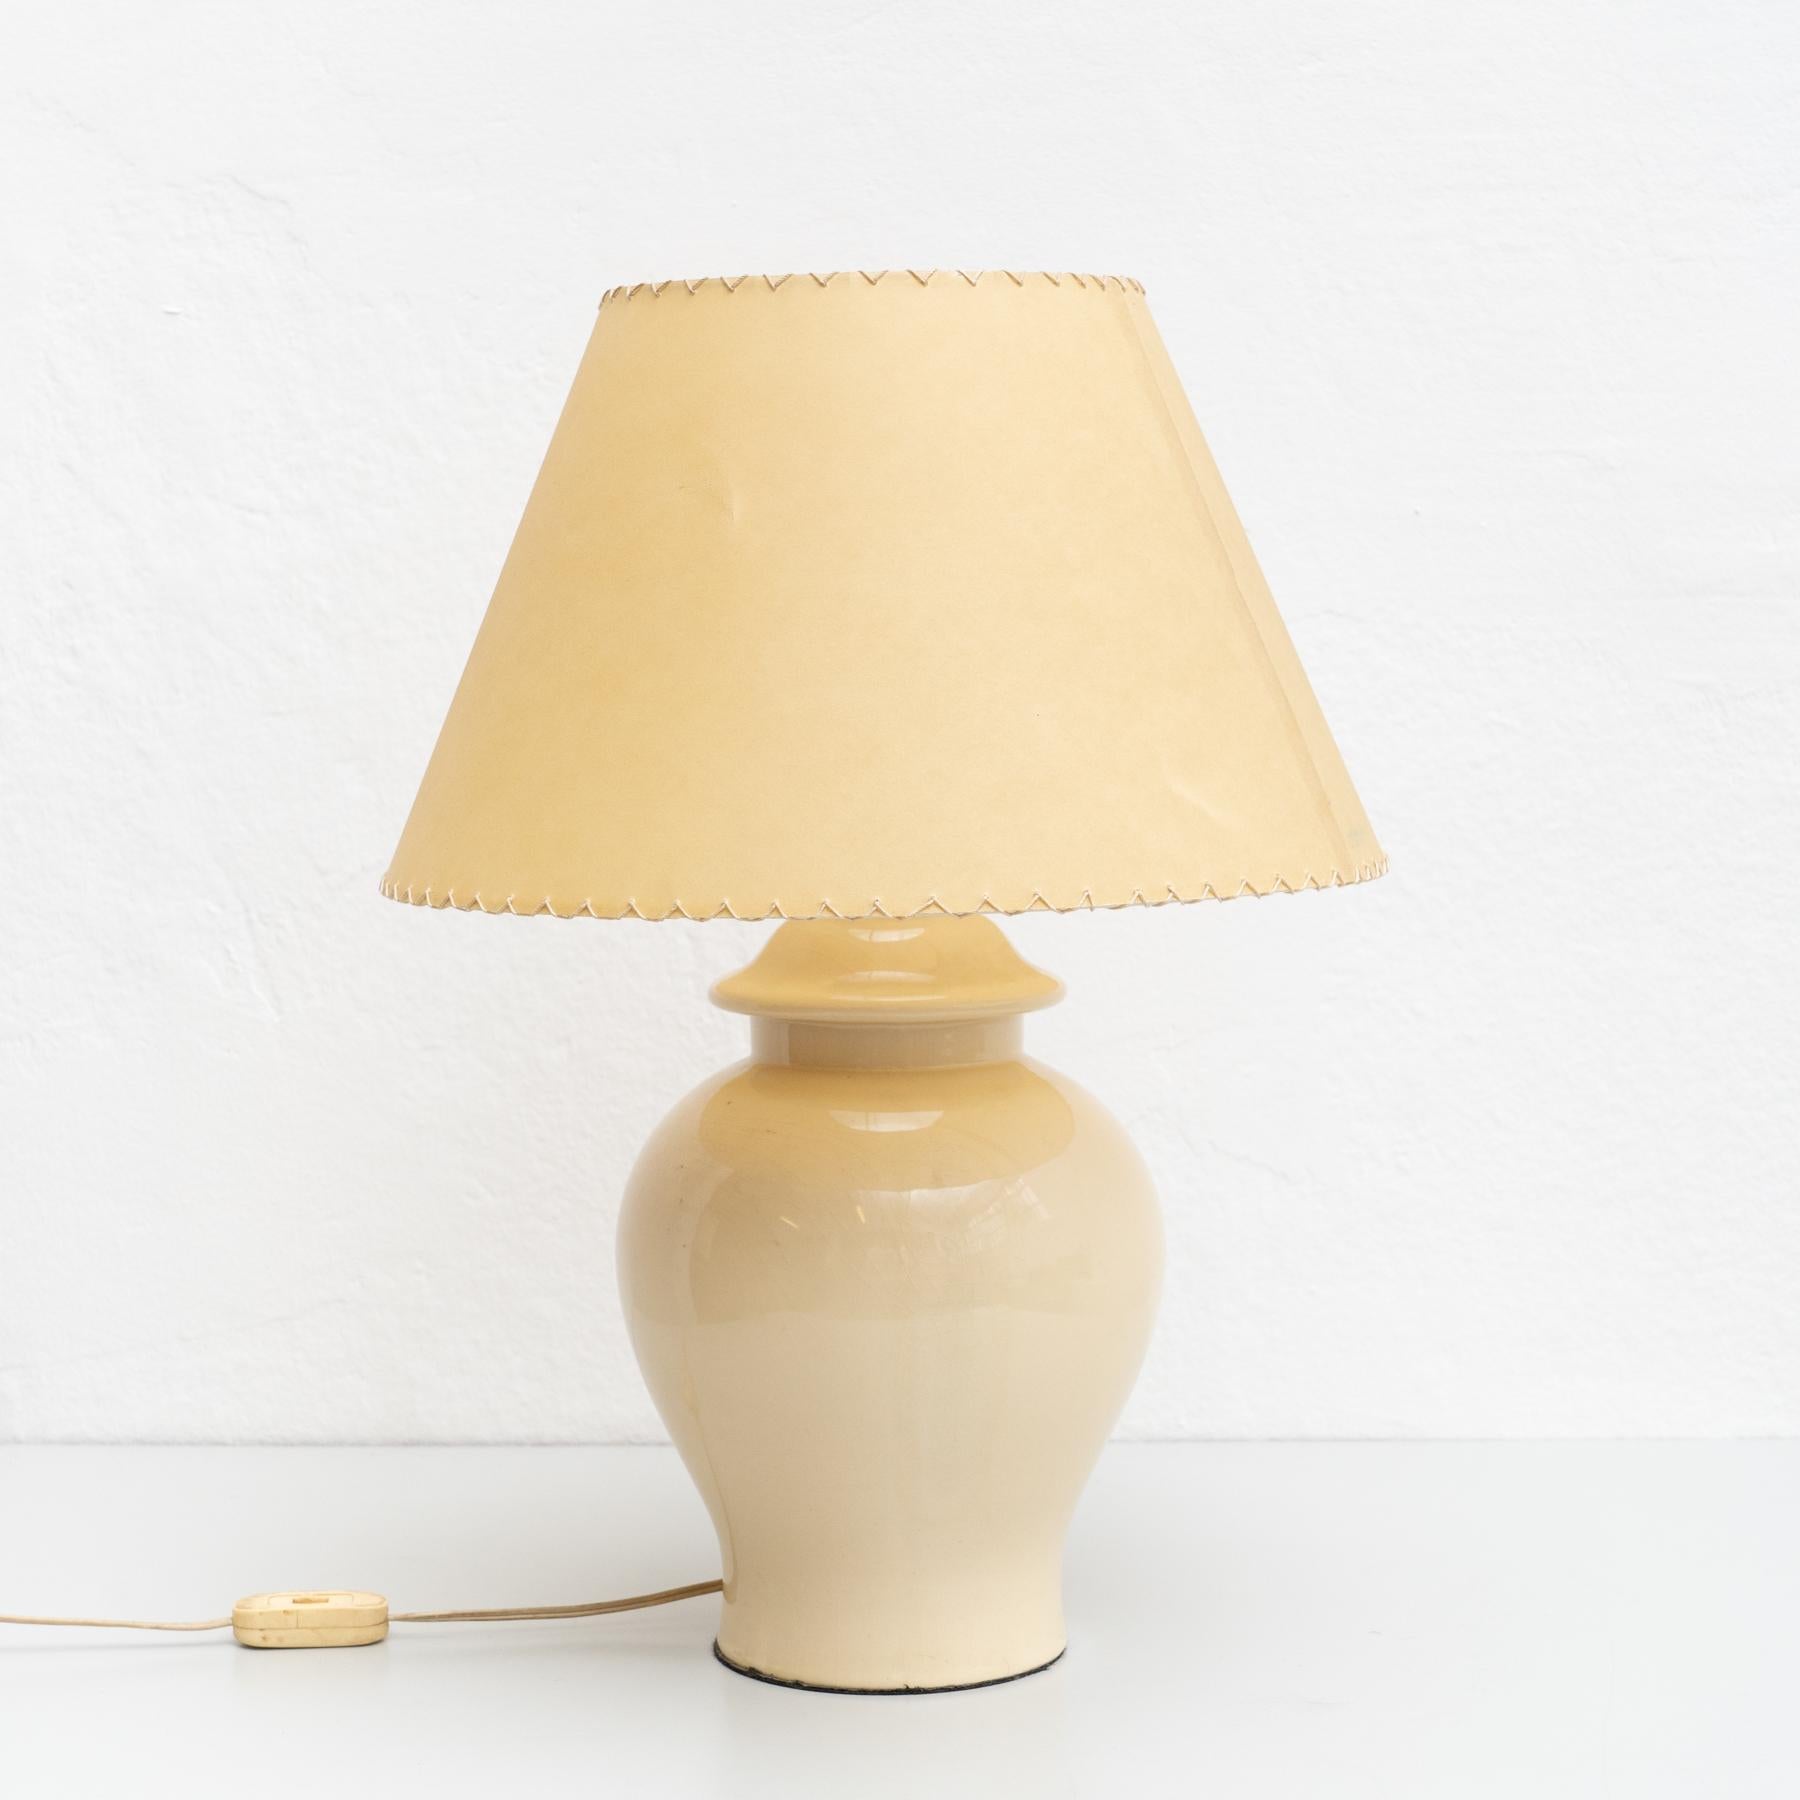 Ceramic vintage table lamp. Made of ceramic with a paper screen.

Made by unknown manufacturer in Spain, circa 1970

In original condition, wear consistent with age and use, preserving a beautiful